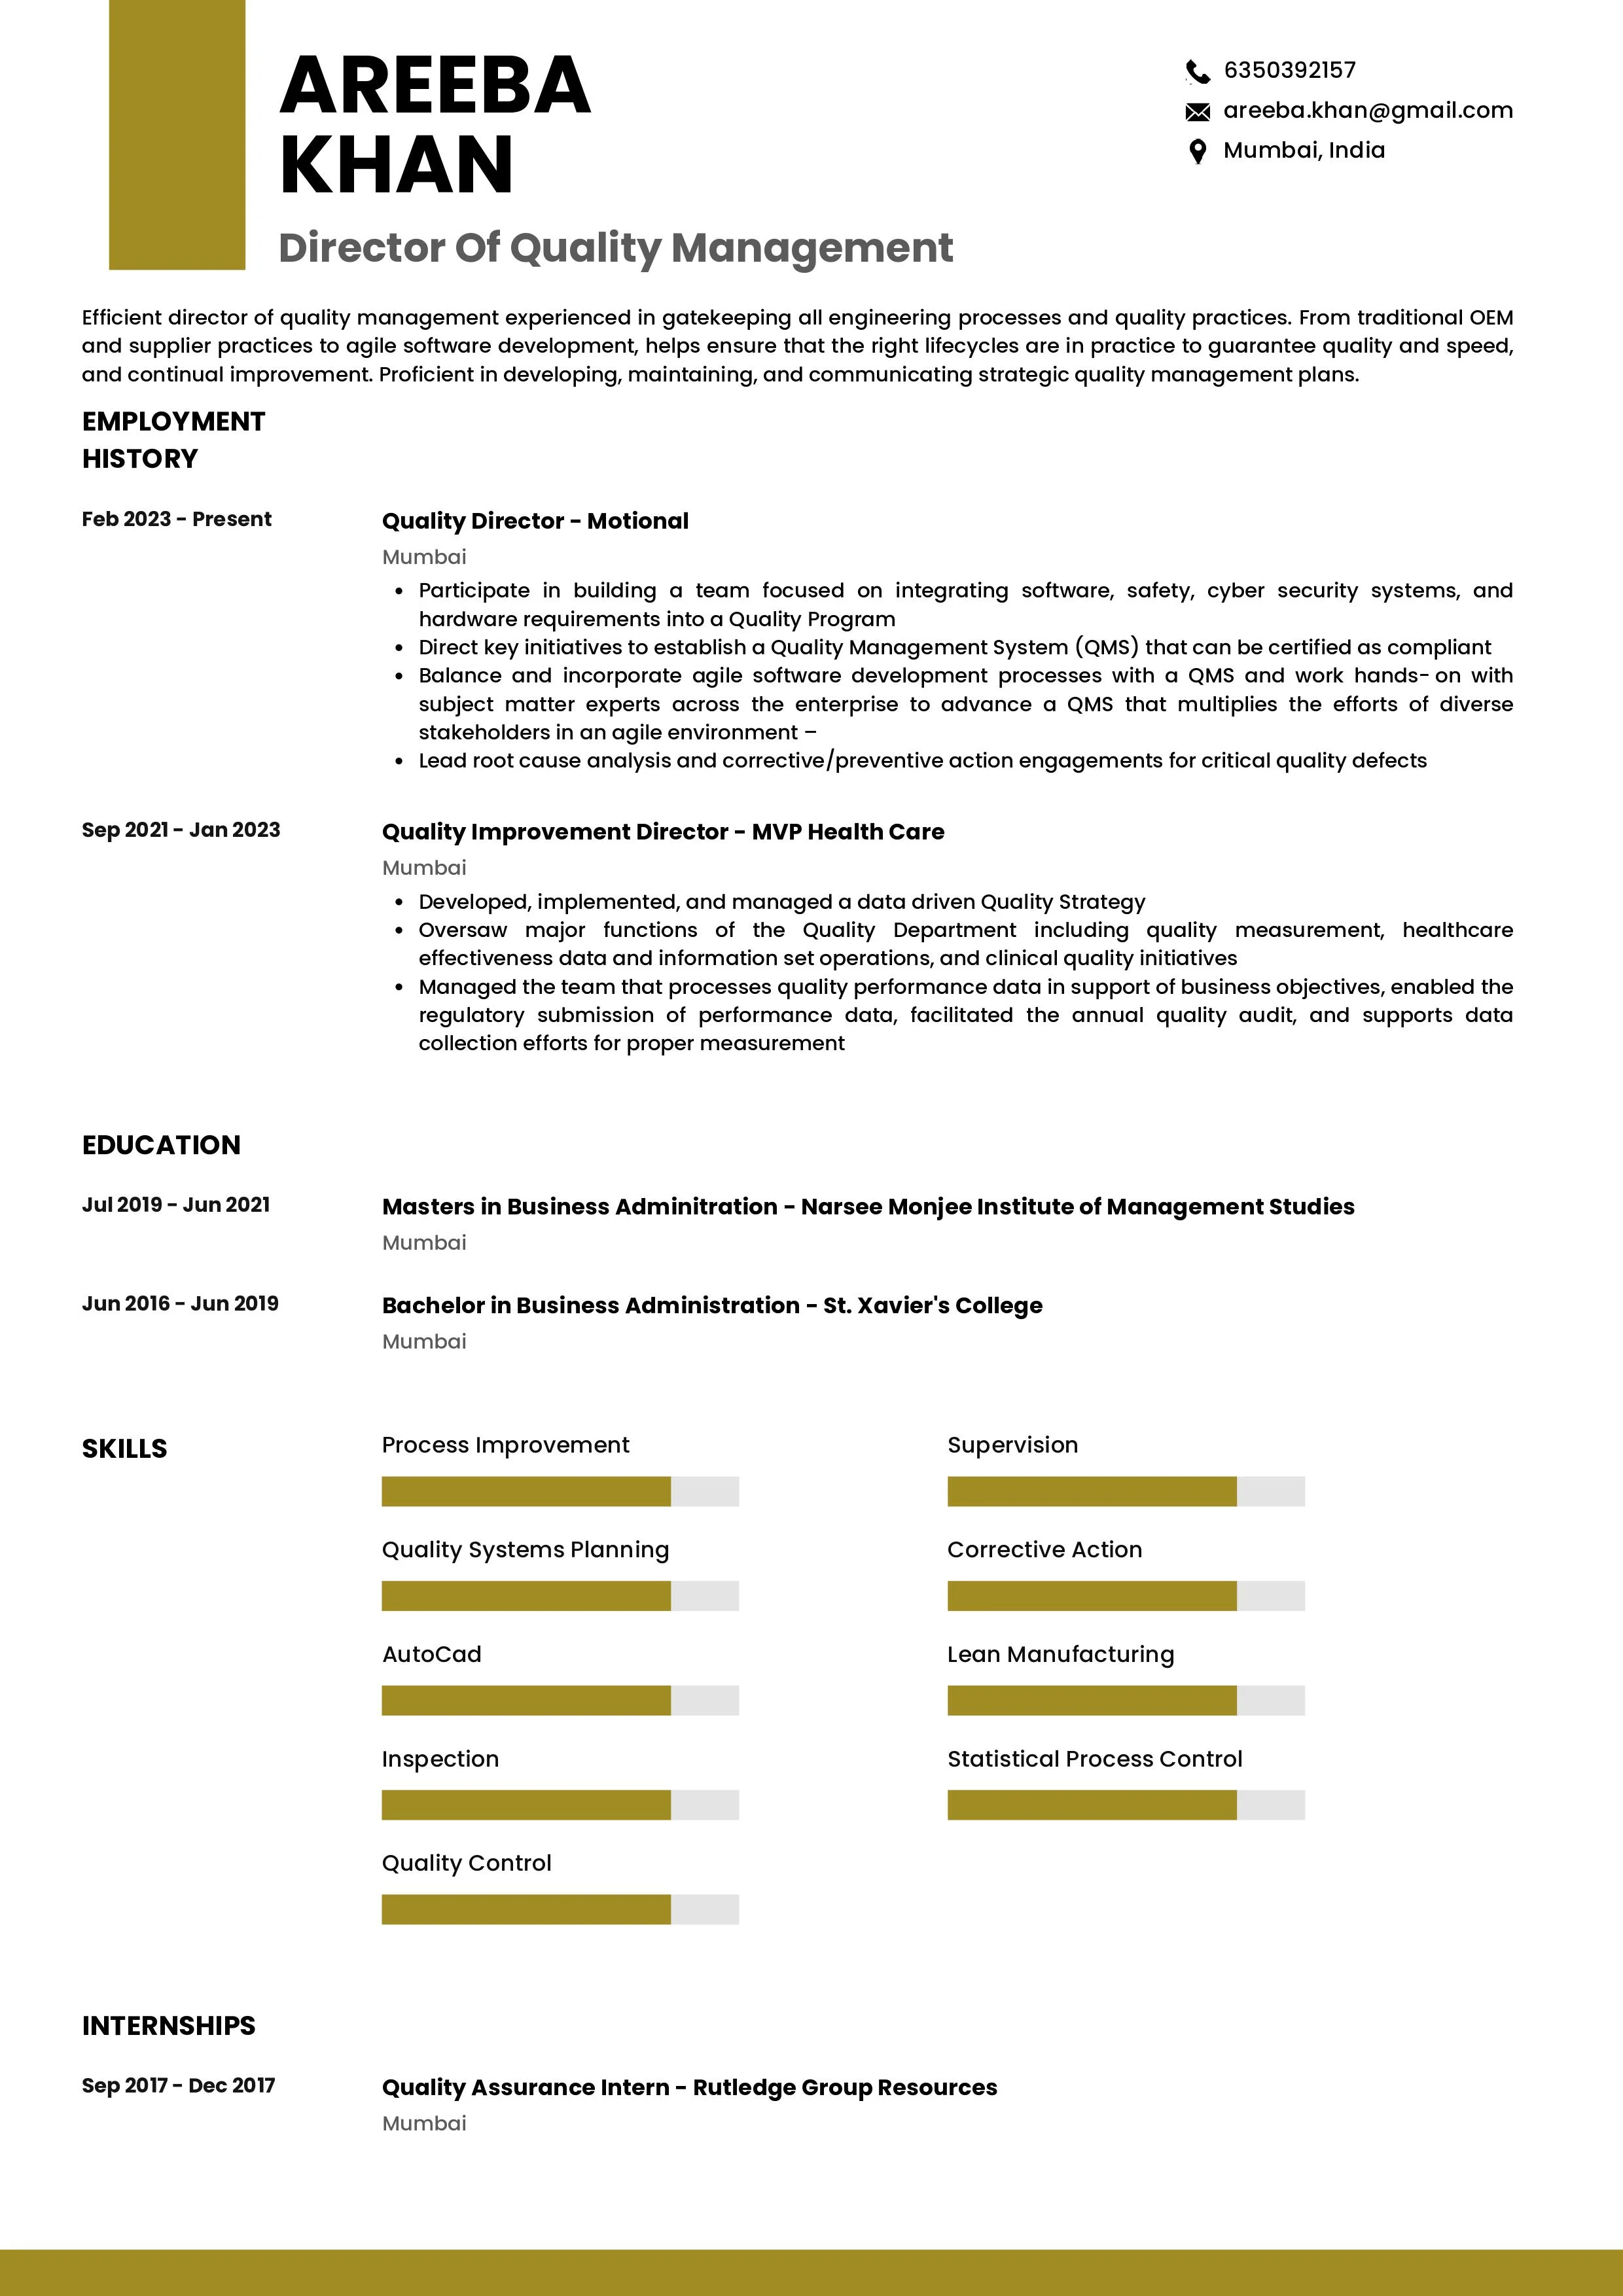 Sample Resume of Director of Quality Management | Free Resume Templates & Samples on Resumod.co